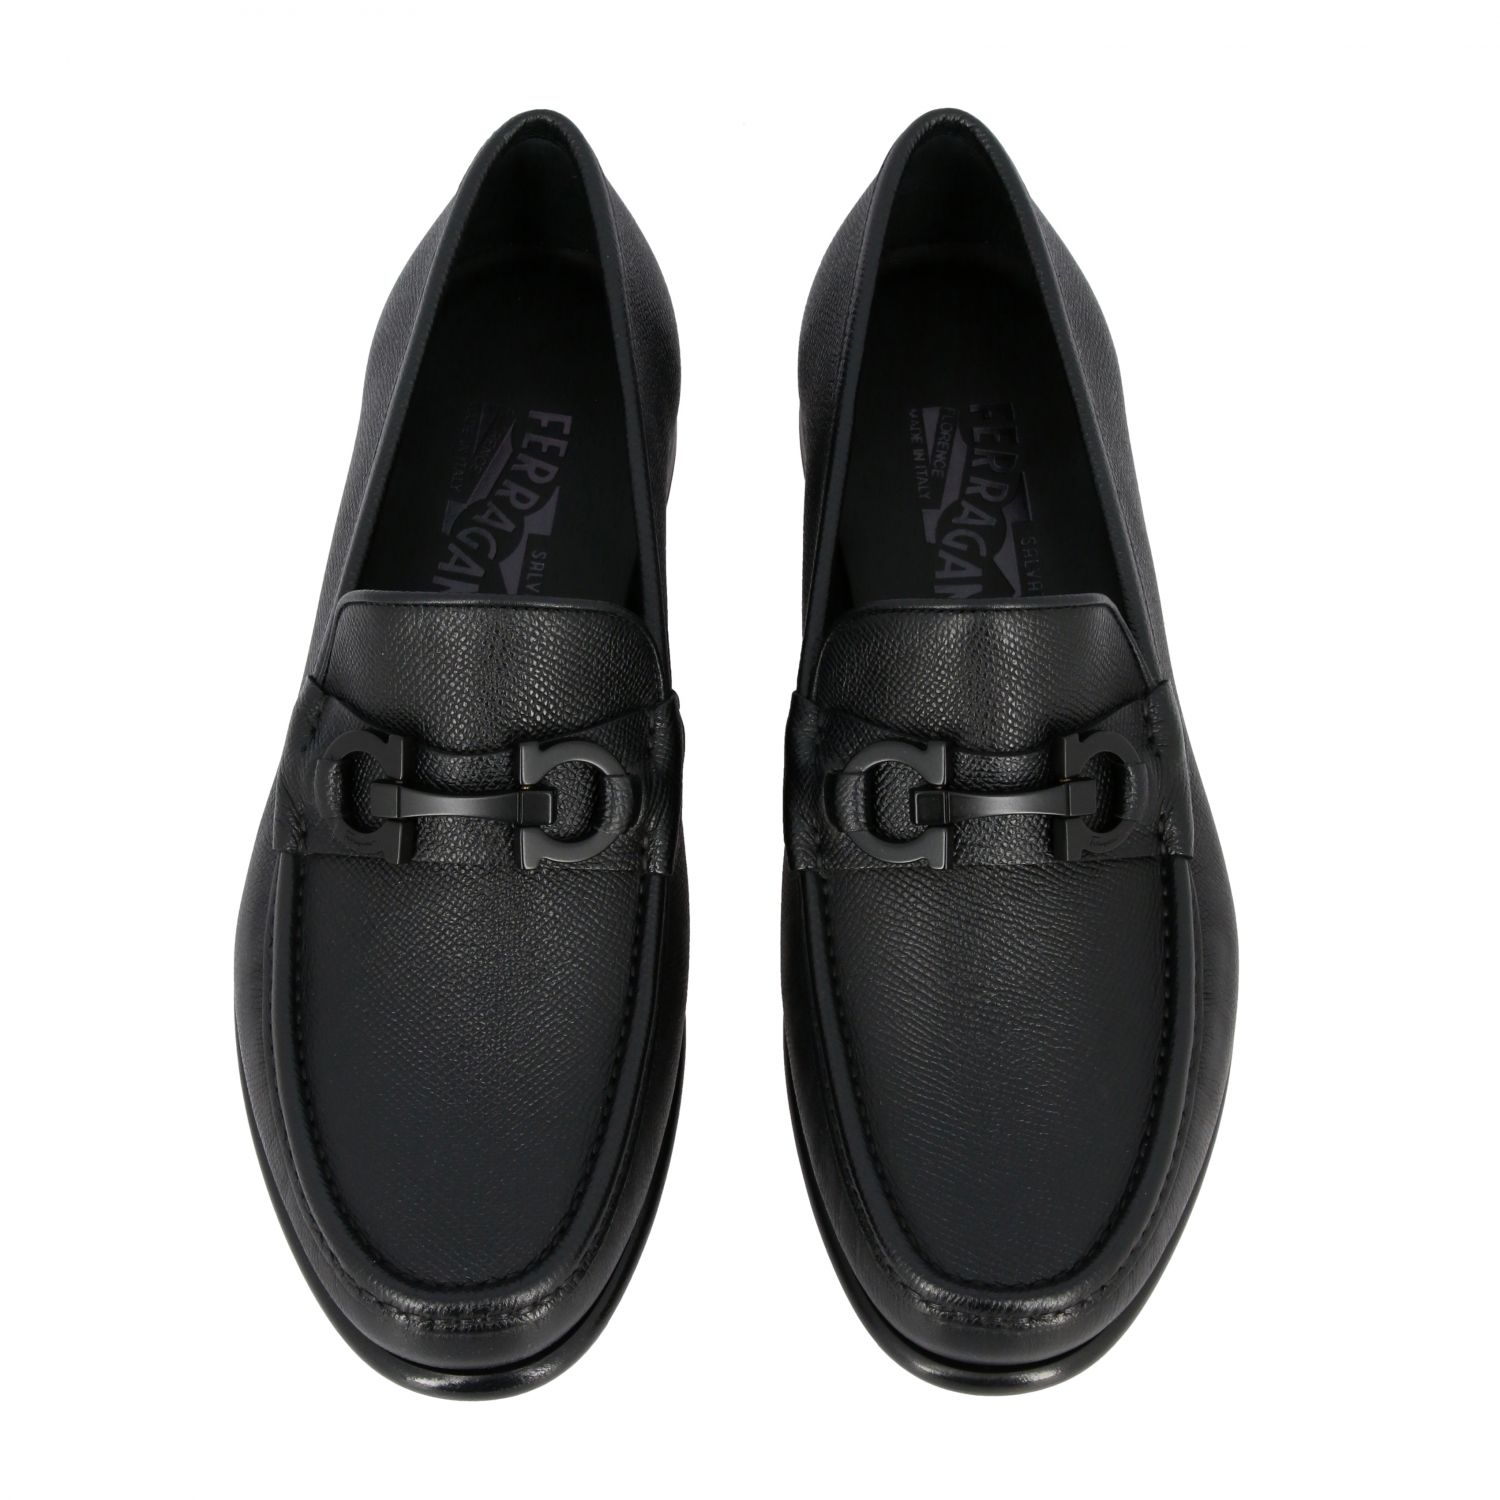 Salvatore Ferragamo Outlet: Crown loafer in saffiano leather with ...